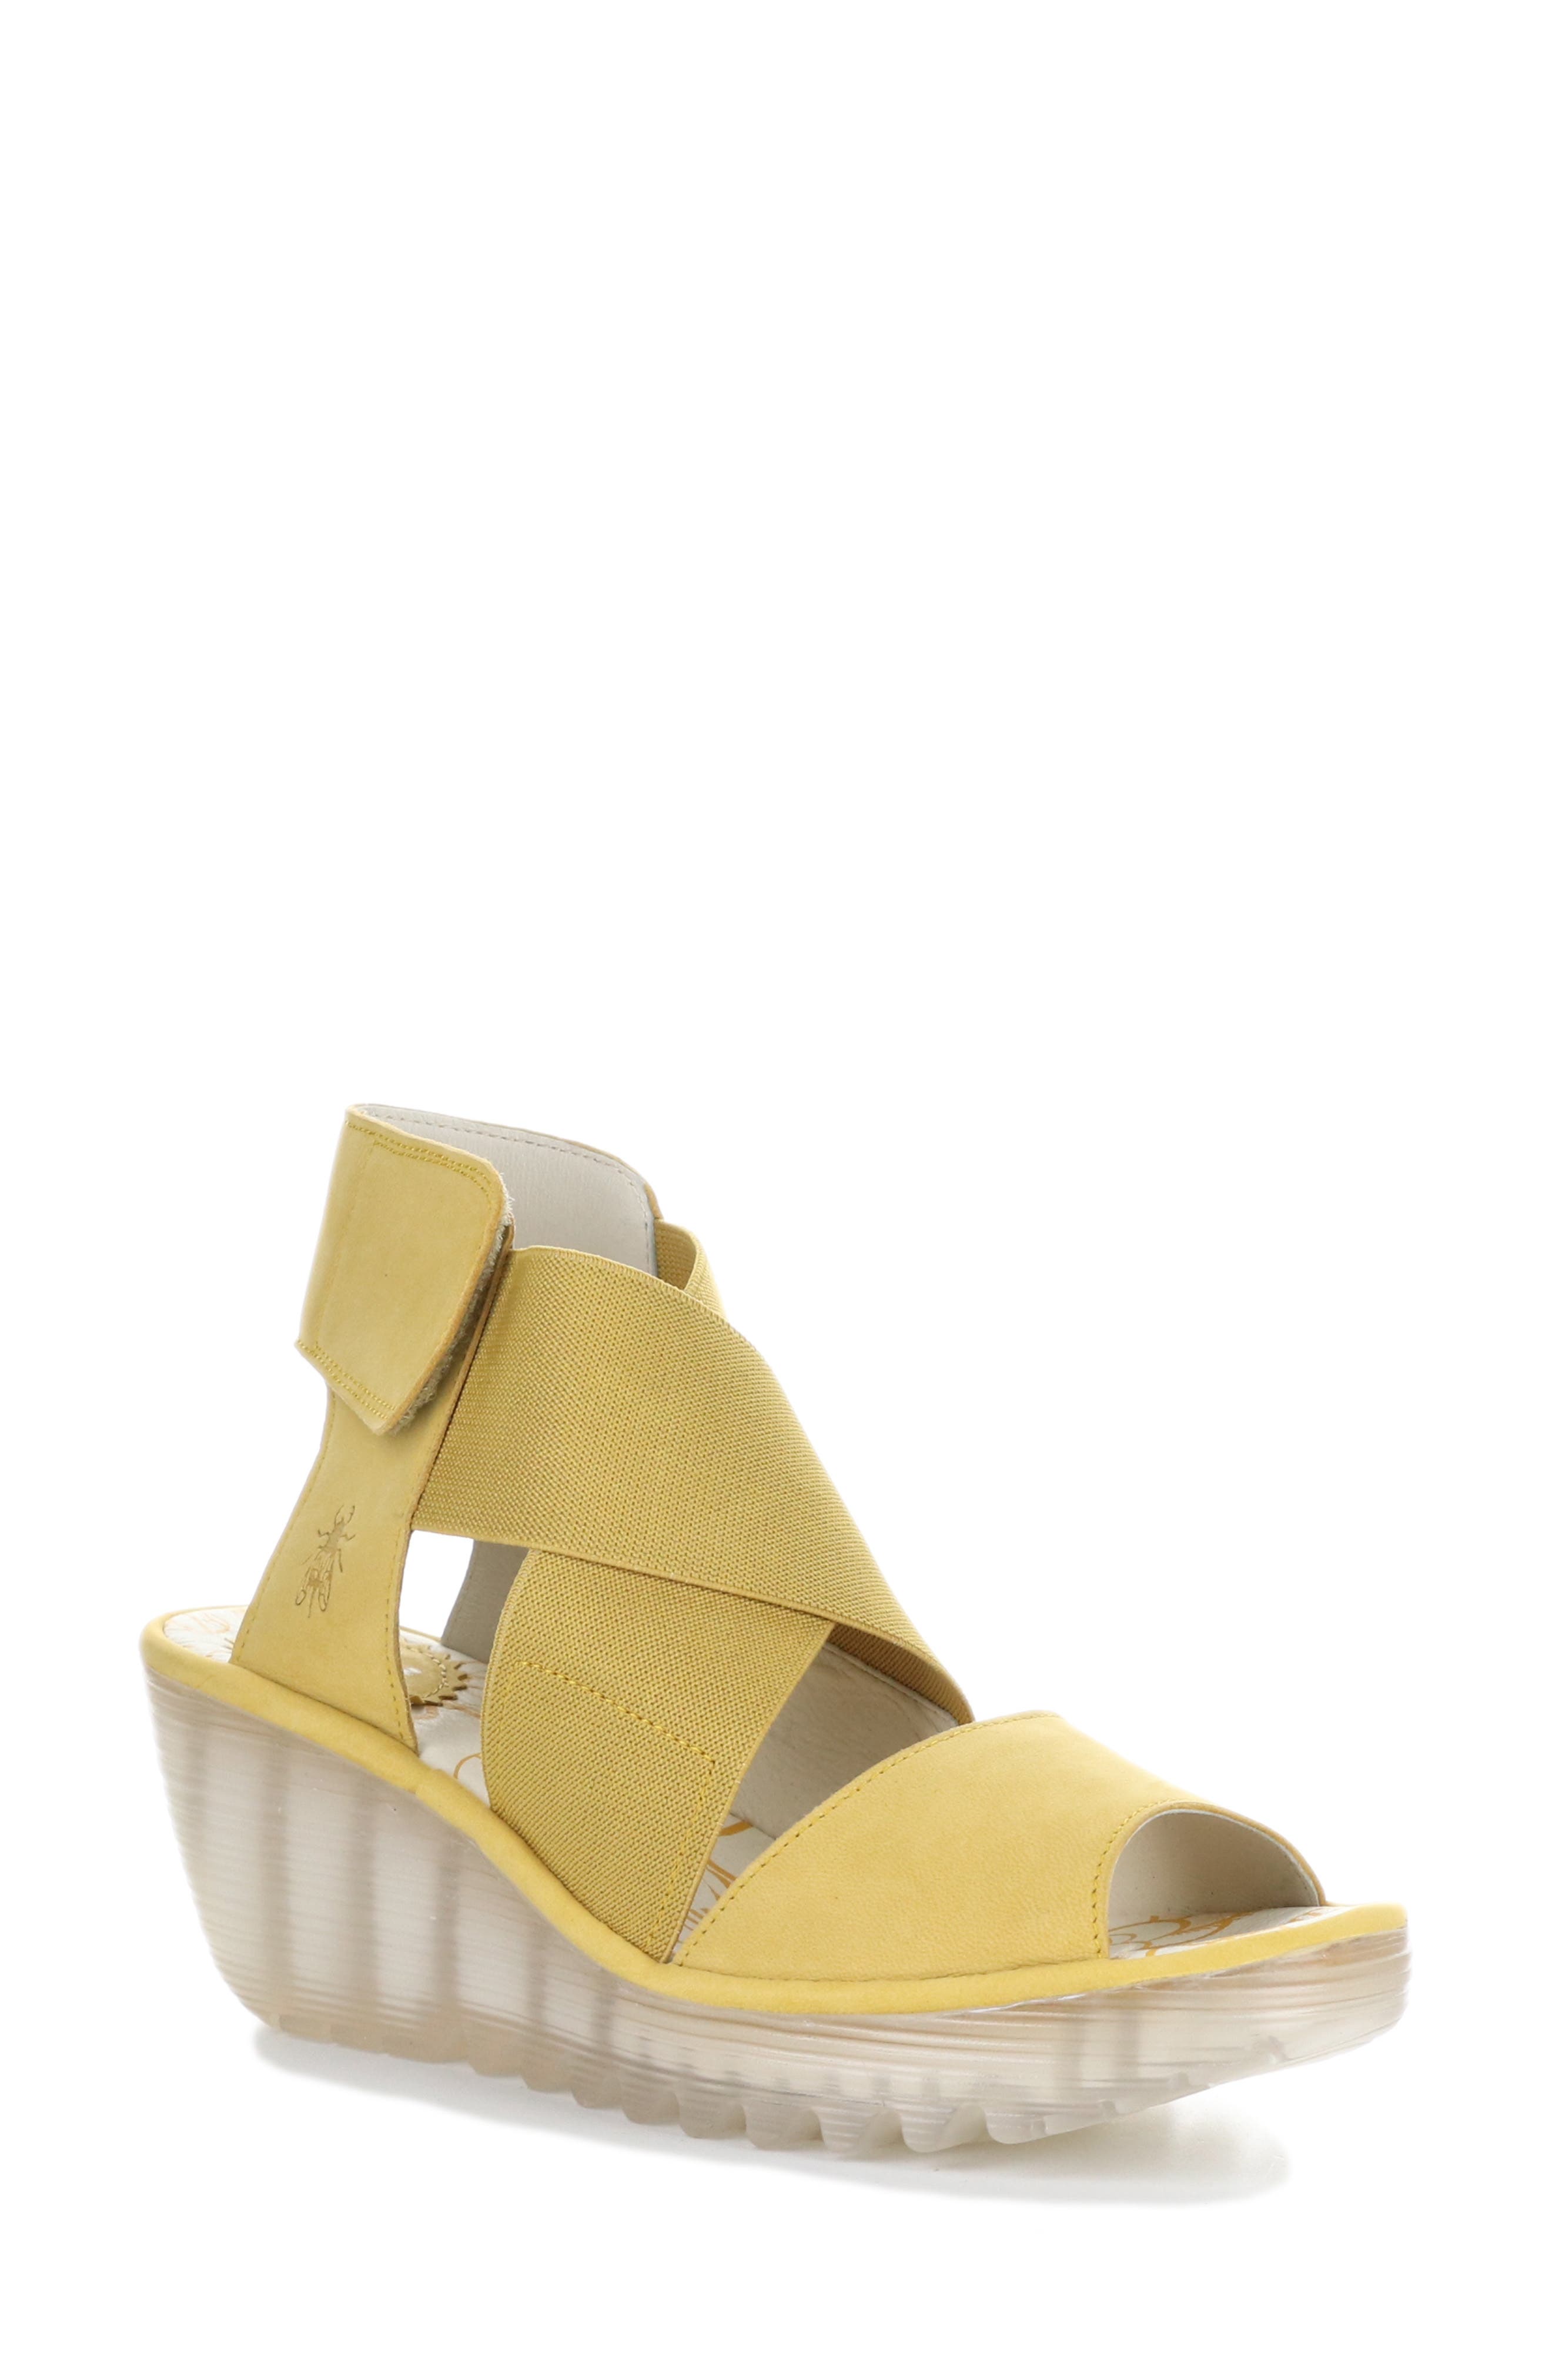 fly london yellow sandals